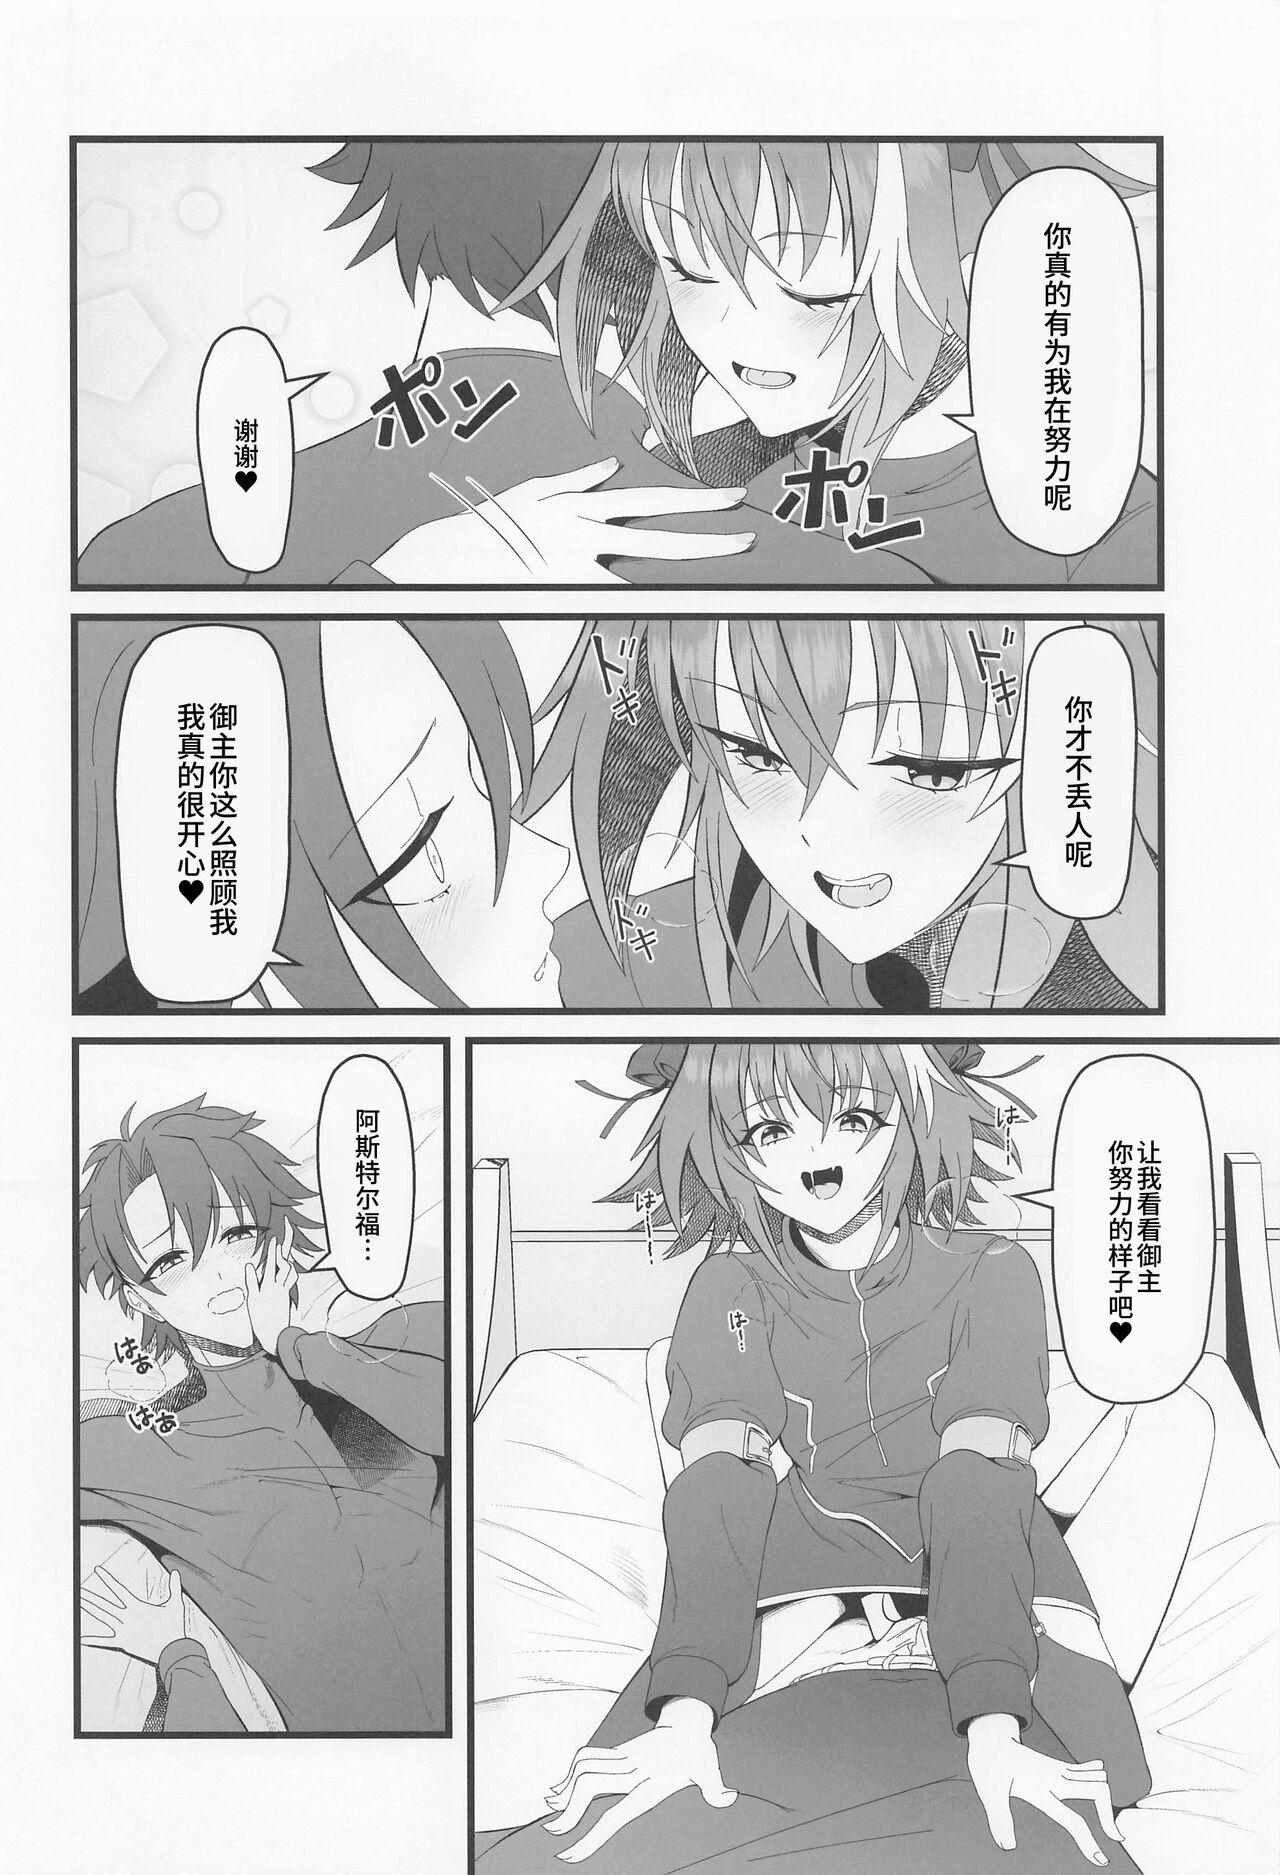 Clip Kimi no Ichiban ni Naritakute - I wanted to be your number one. - Fate grand order Large - Page 9